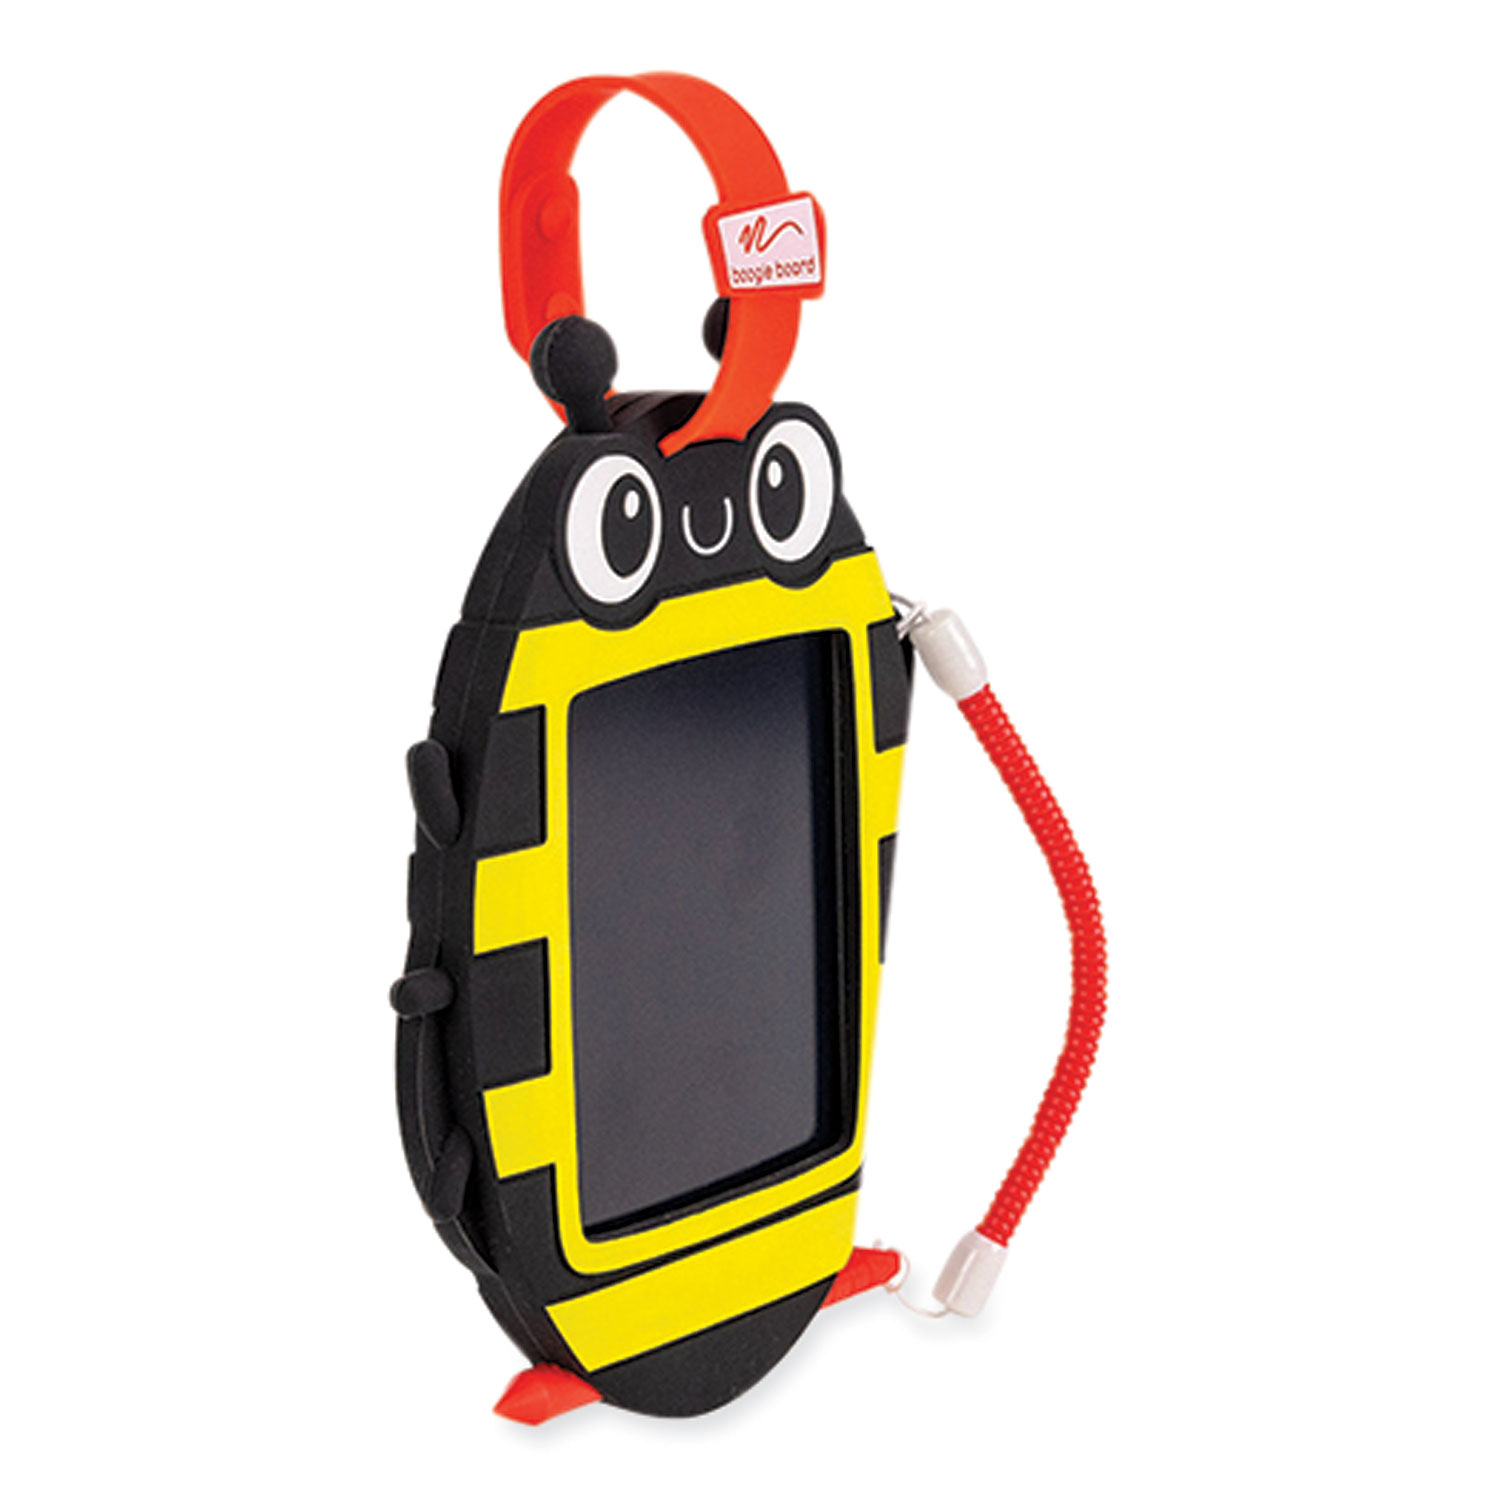 Sketch Pals Digital Doodle Pad, Dart the Bee, 4 LCD Touchscreen, 5 x  8.25, Black/Yellow/White